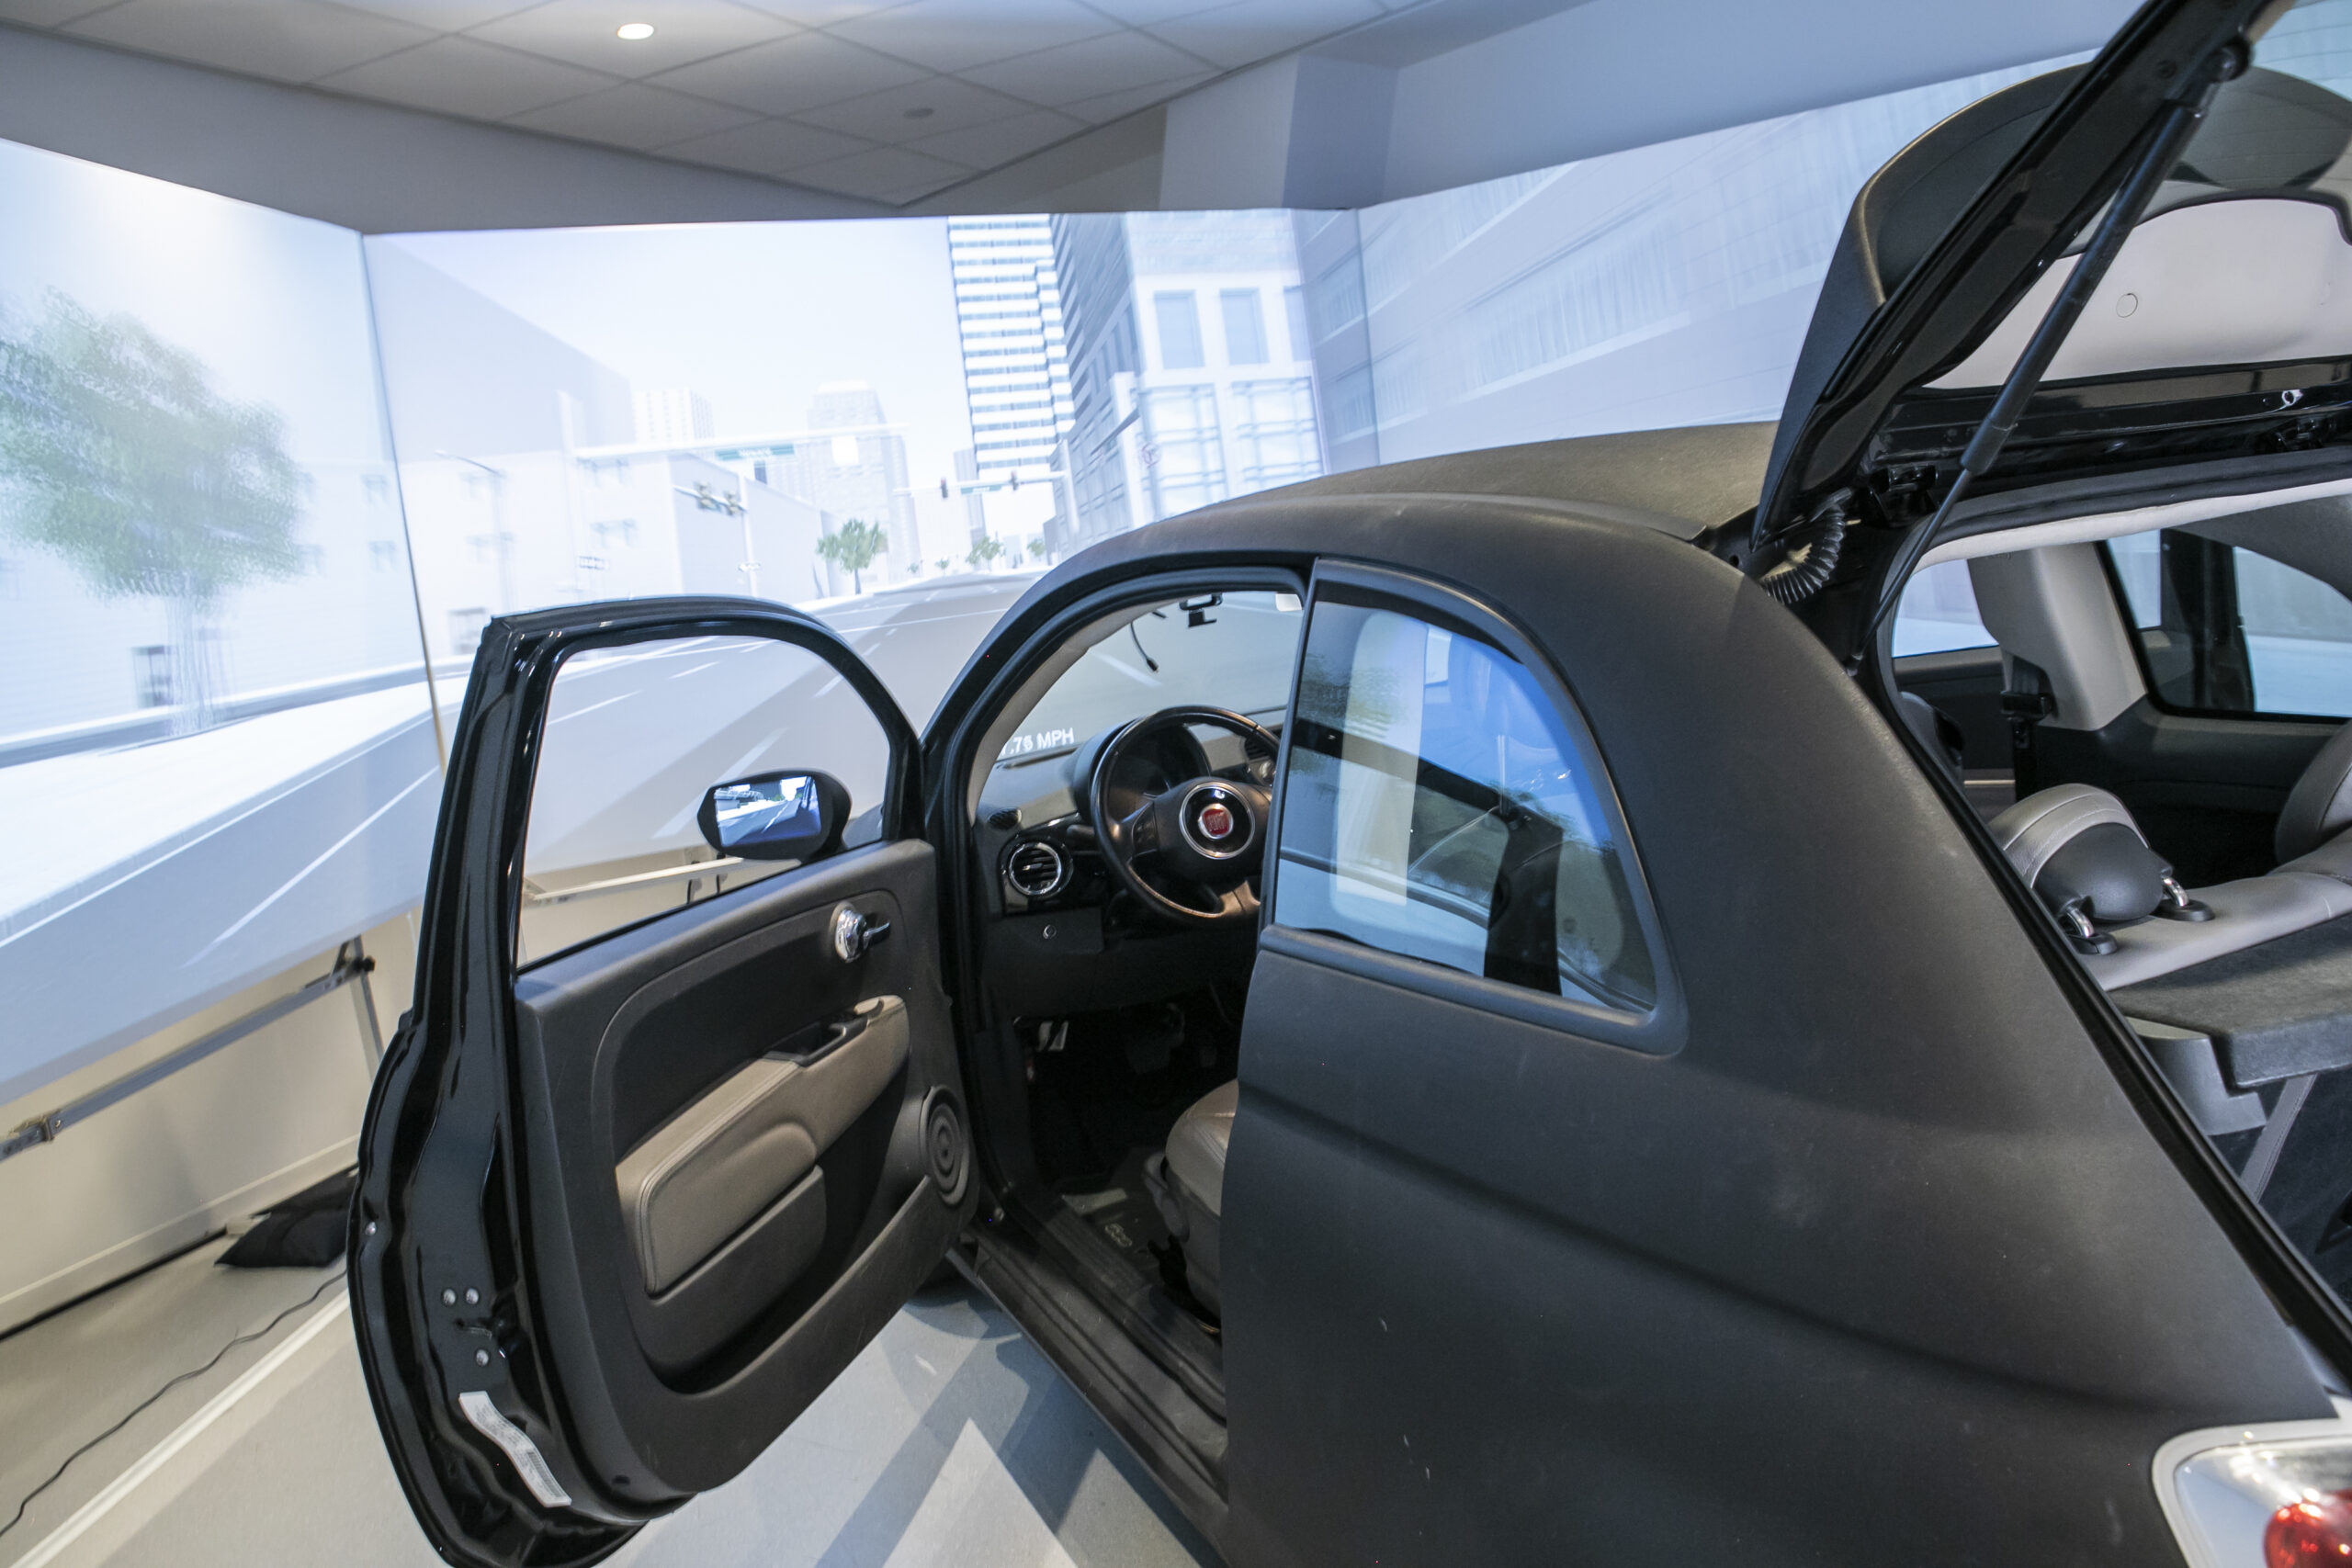 Mixed-reality driving simulator a low-cost alternative